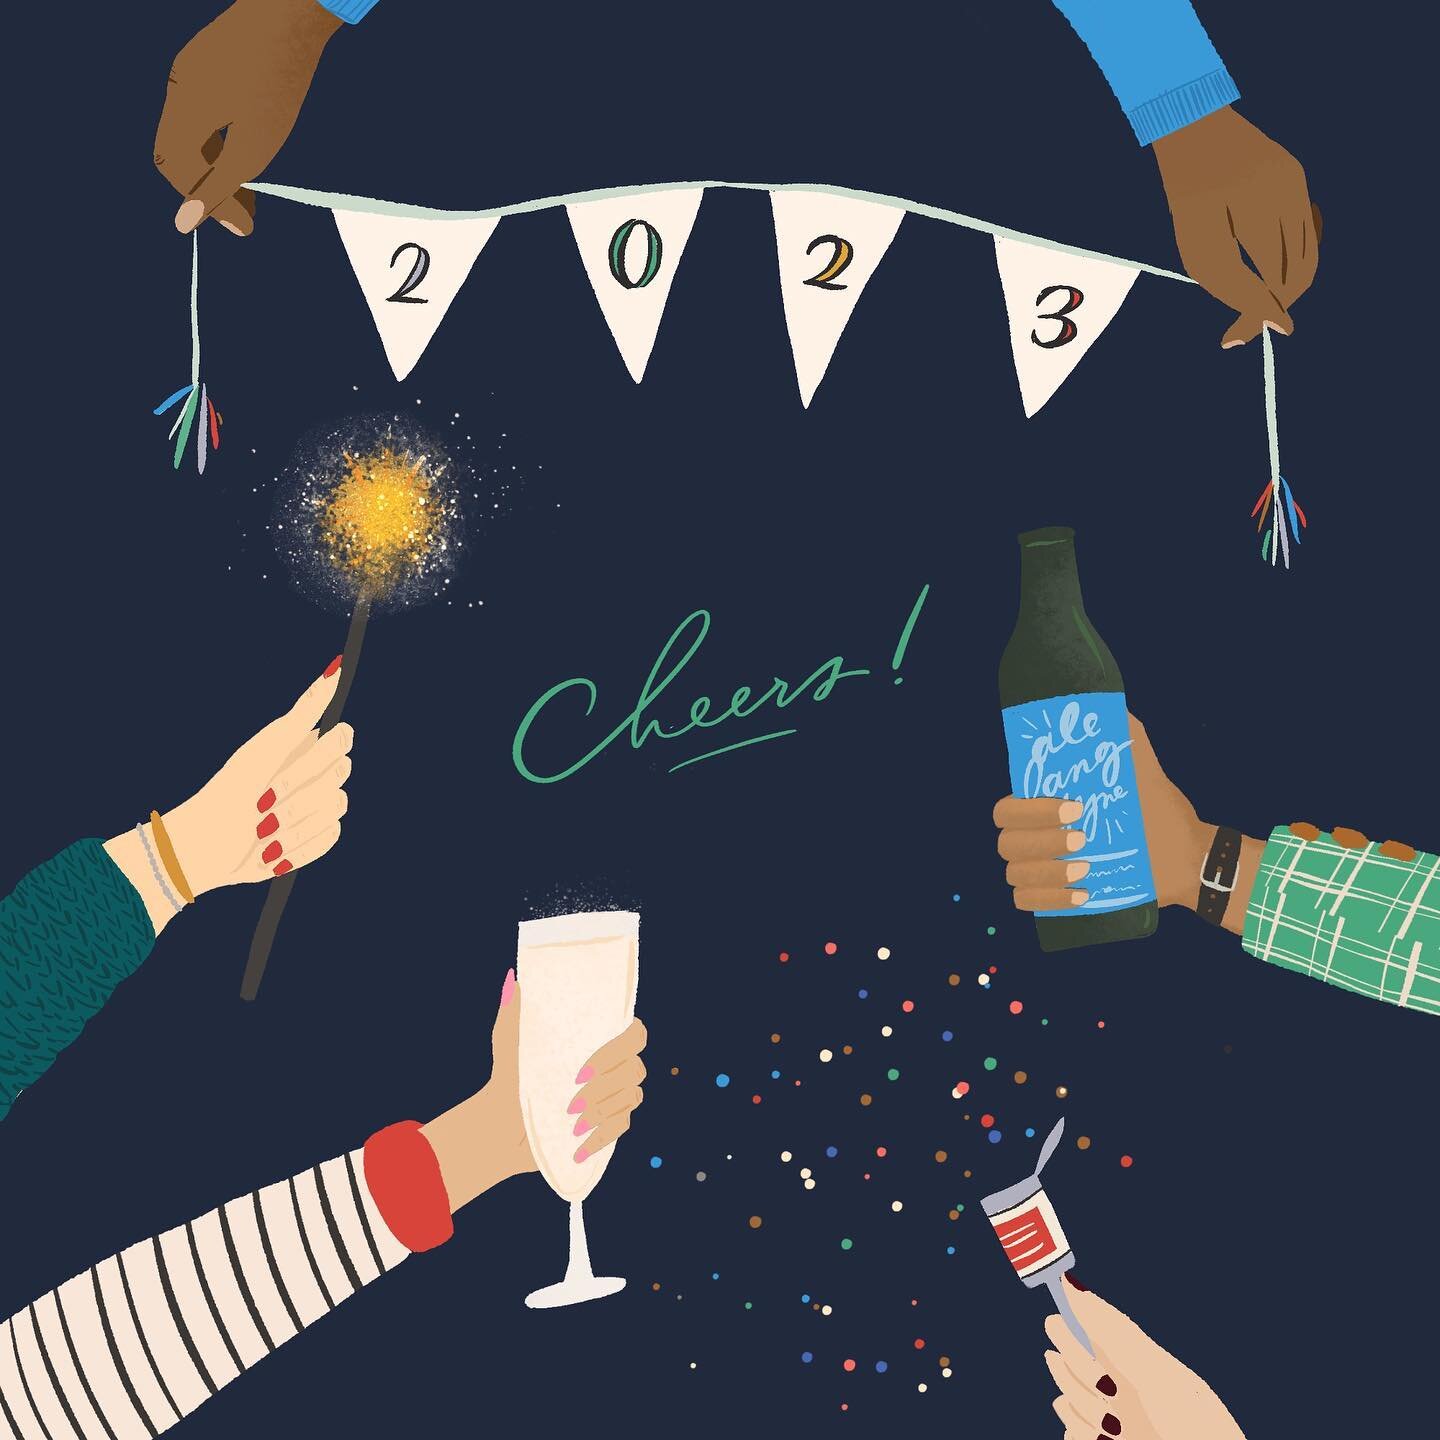 Cheers to a new year, a fresh start, and all of the possibilities in 2023! 🥂🎉